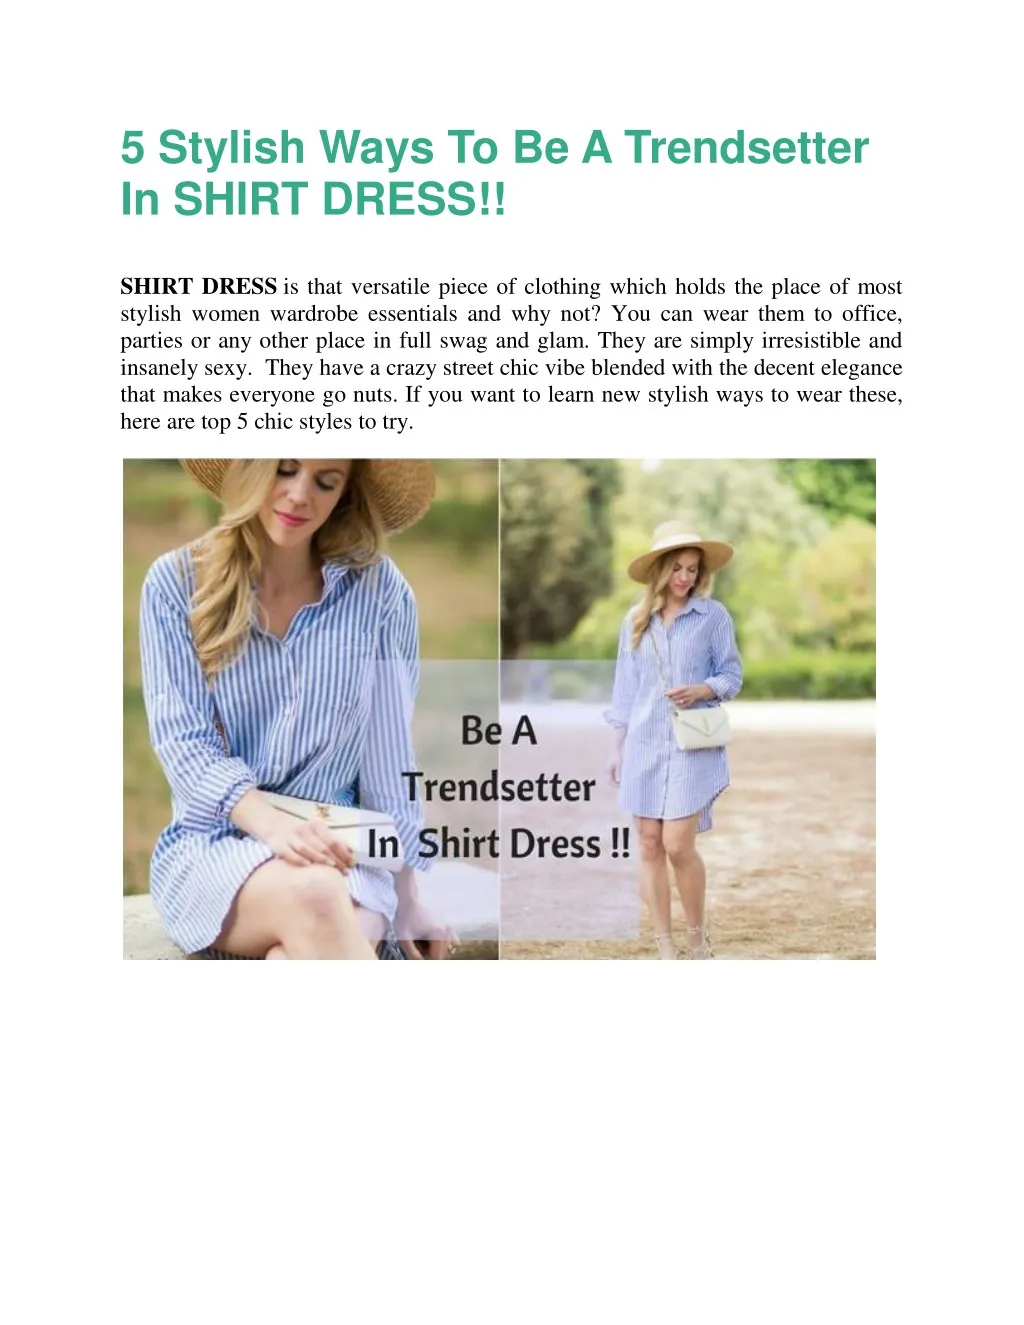 5 stylish ways to be a trendsetter in shirt dress